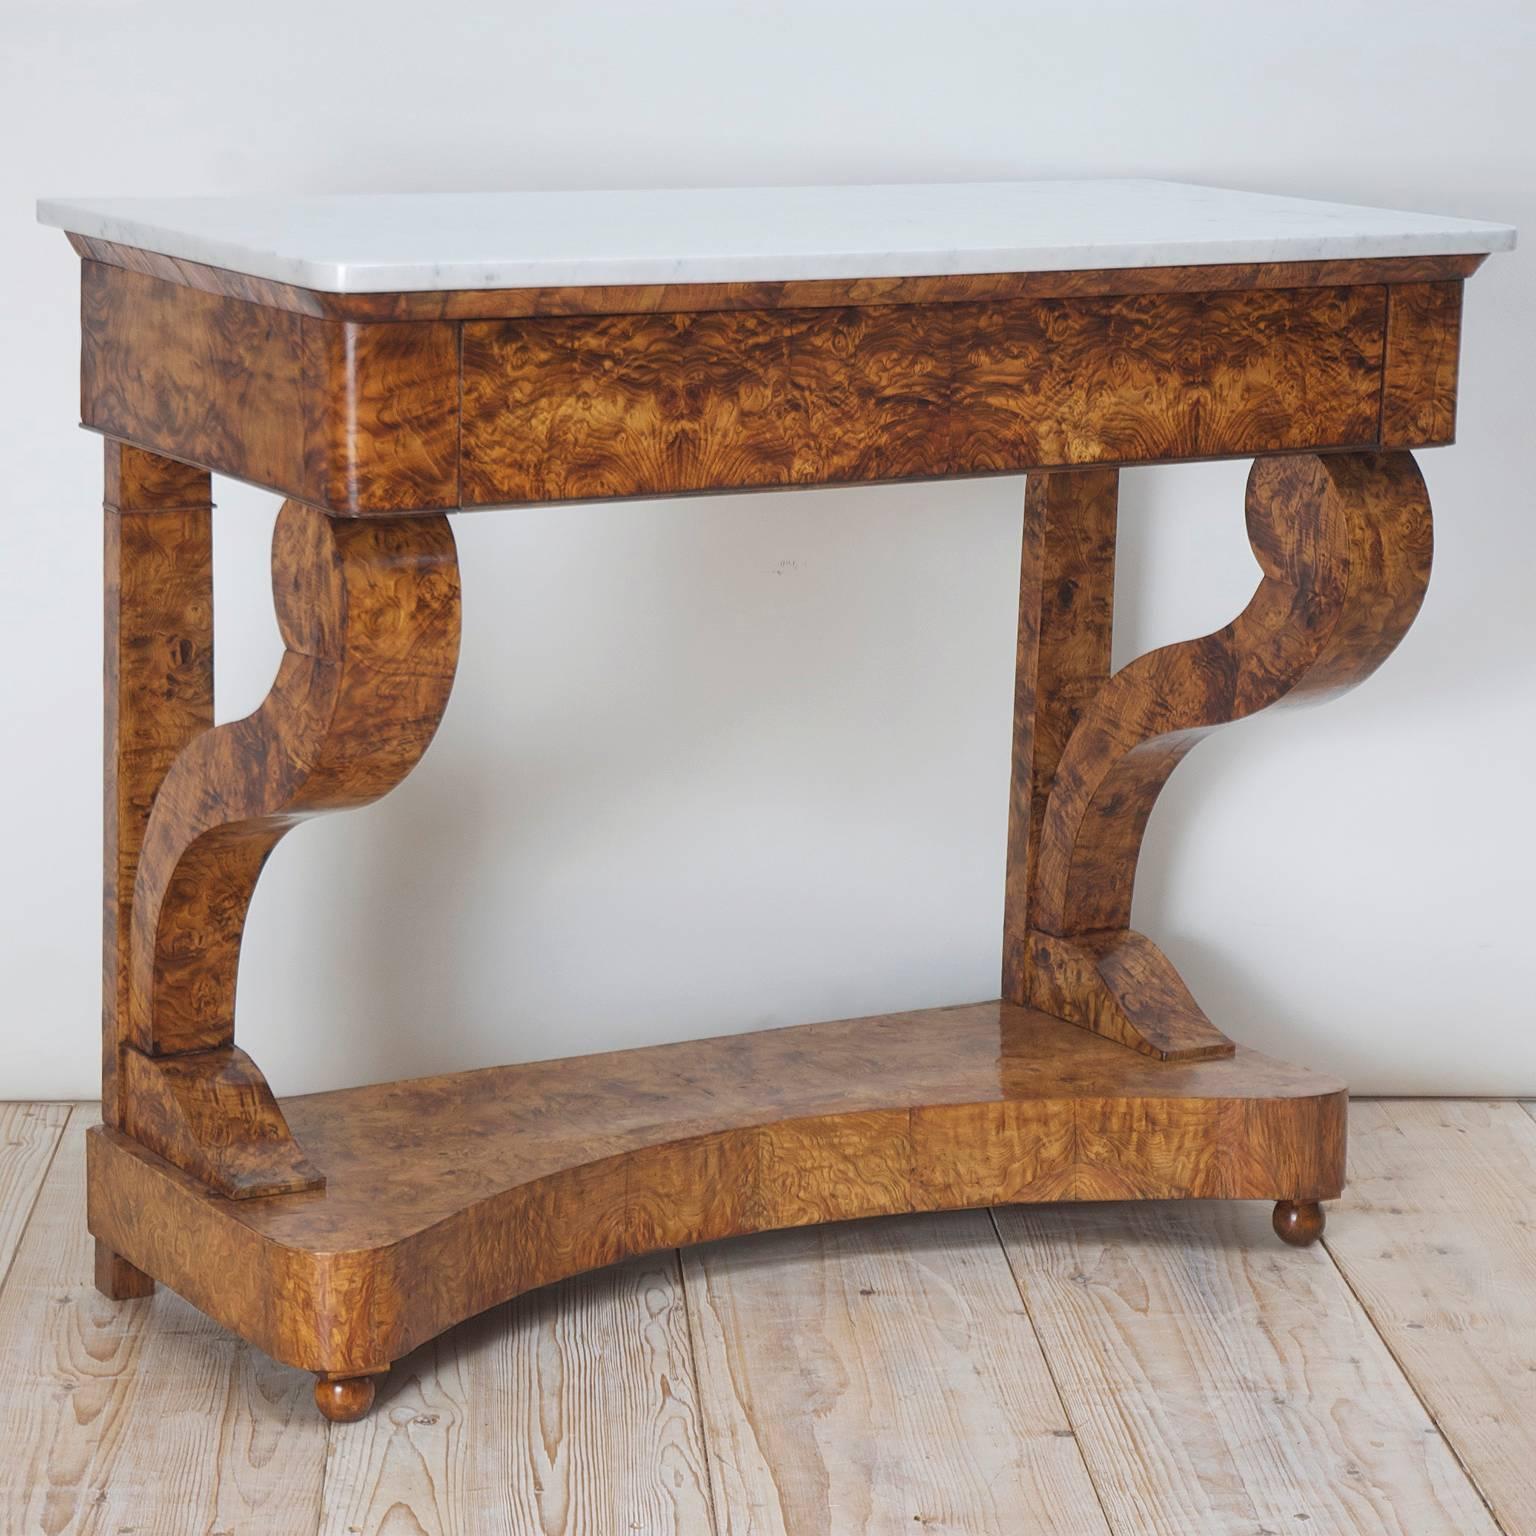 An Empire or Biedermeier Console in burl olive-ash with white Carrara marble top. Offers a drawer with two volute columns that rest over a concave base and terminate in small turned ball feet. The grain of the wood is exceptionally beautiful!